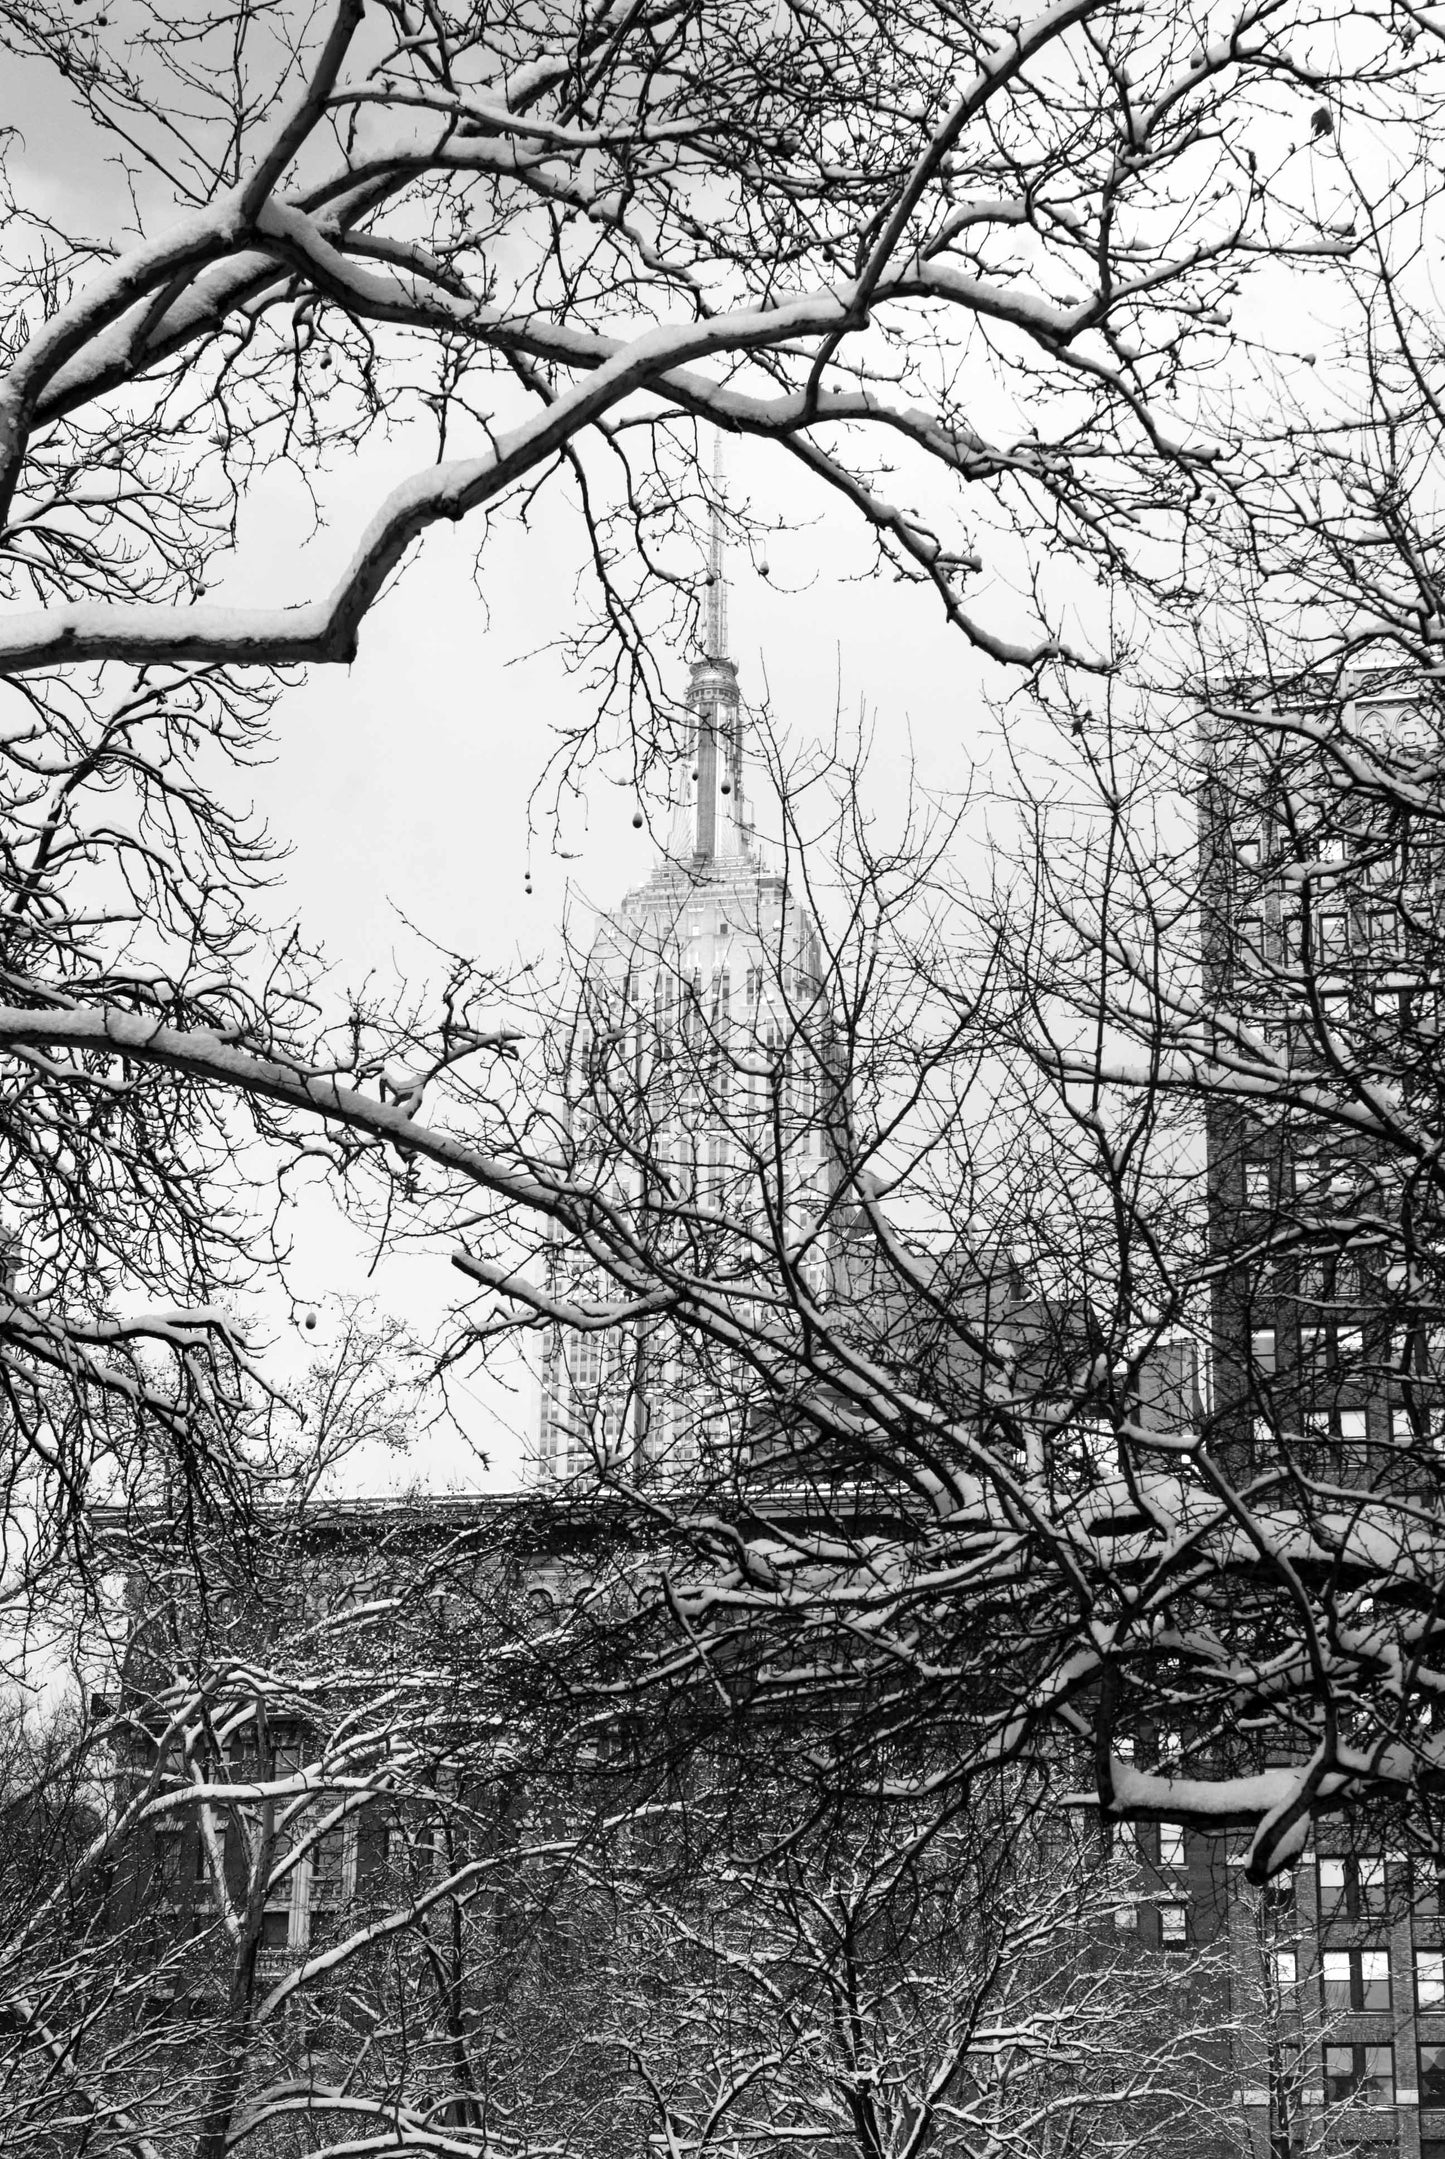 Alessandra Mattanza | CONTRASTS, Empire State Building, New York. The bare snow-laden branches of trees in Bryant Park overlay the iconic Empire State Building. Available as an art print or as a photographic print on acrylic glass.